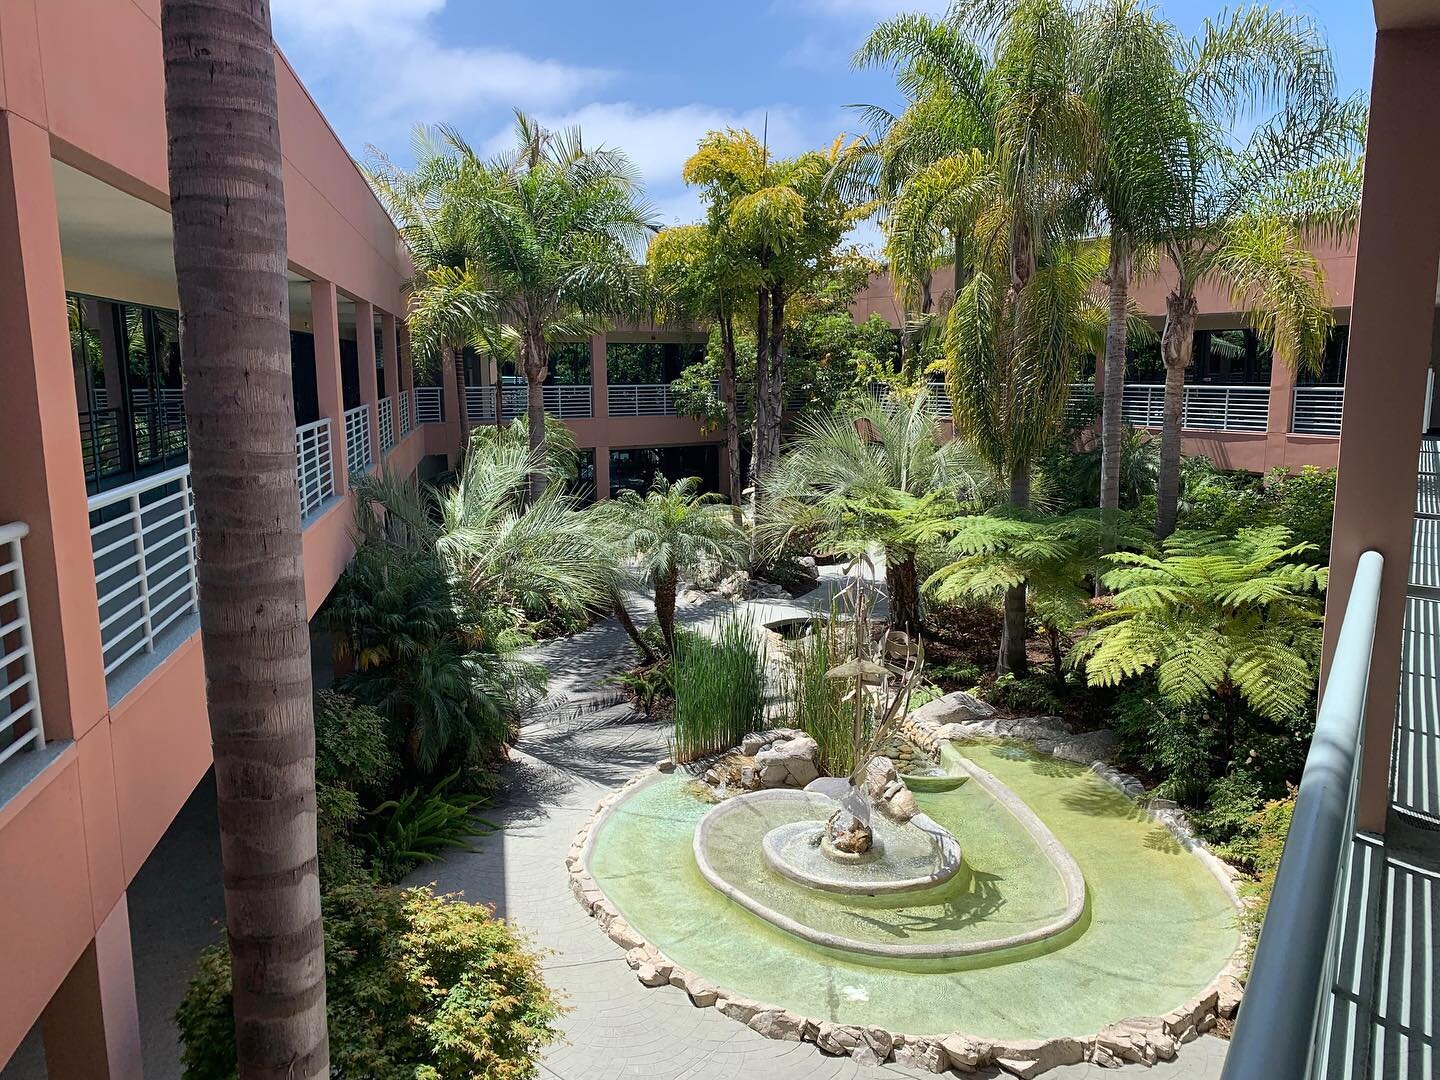 Our Office Courtyard
While waiting for in-person appointments, feel free to relax outdoors by one of the many meditation spots in our office building&rsquo;s interior courtyard.